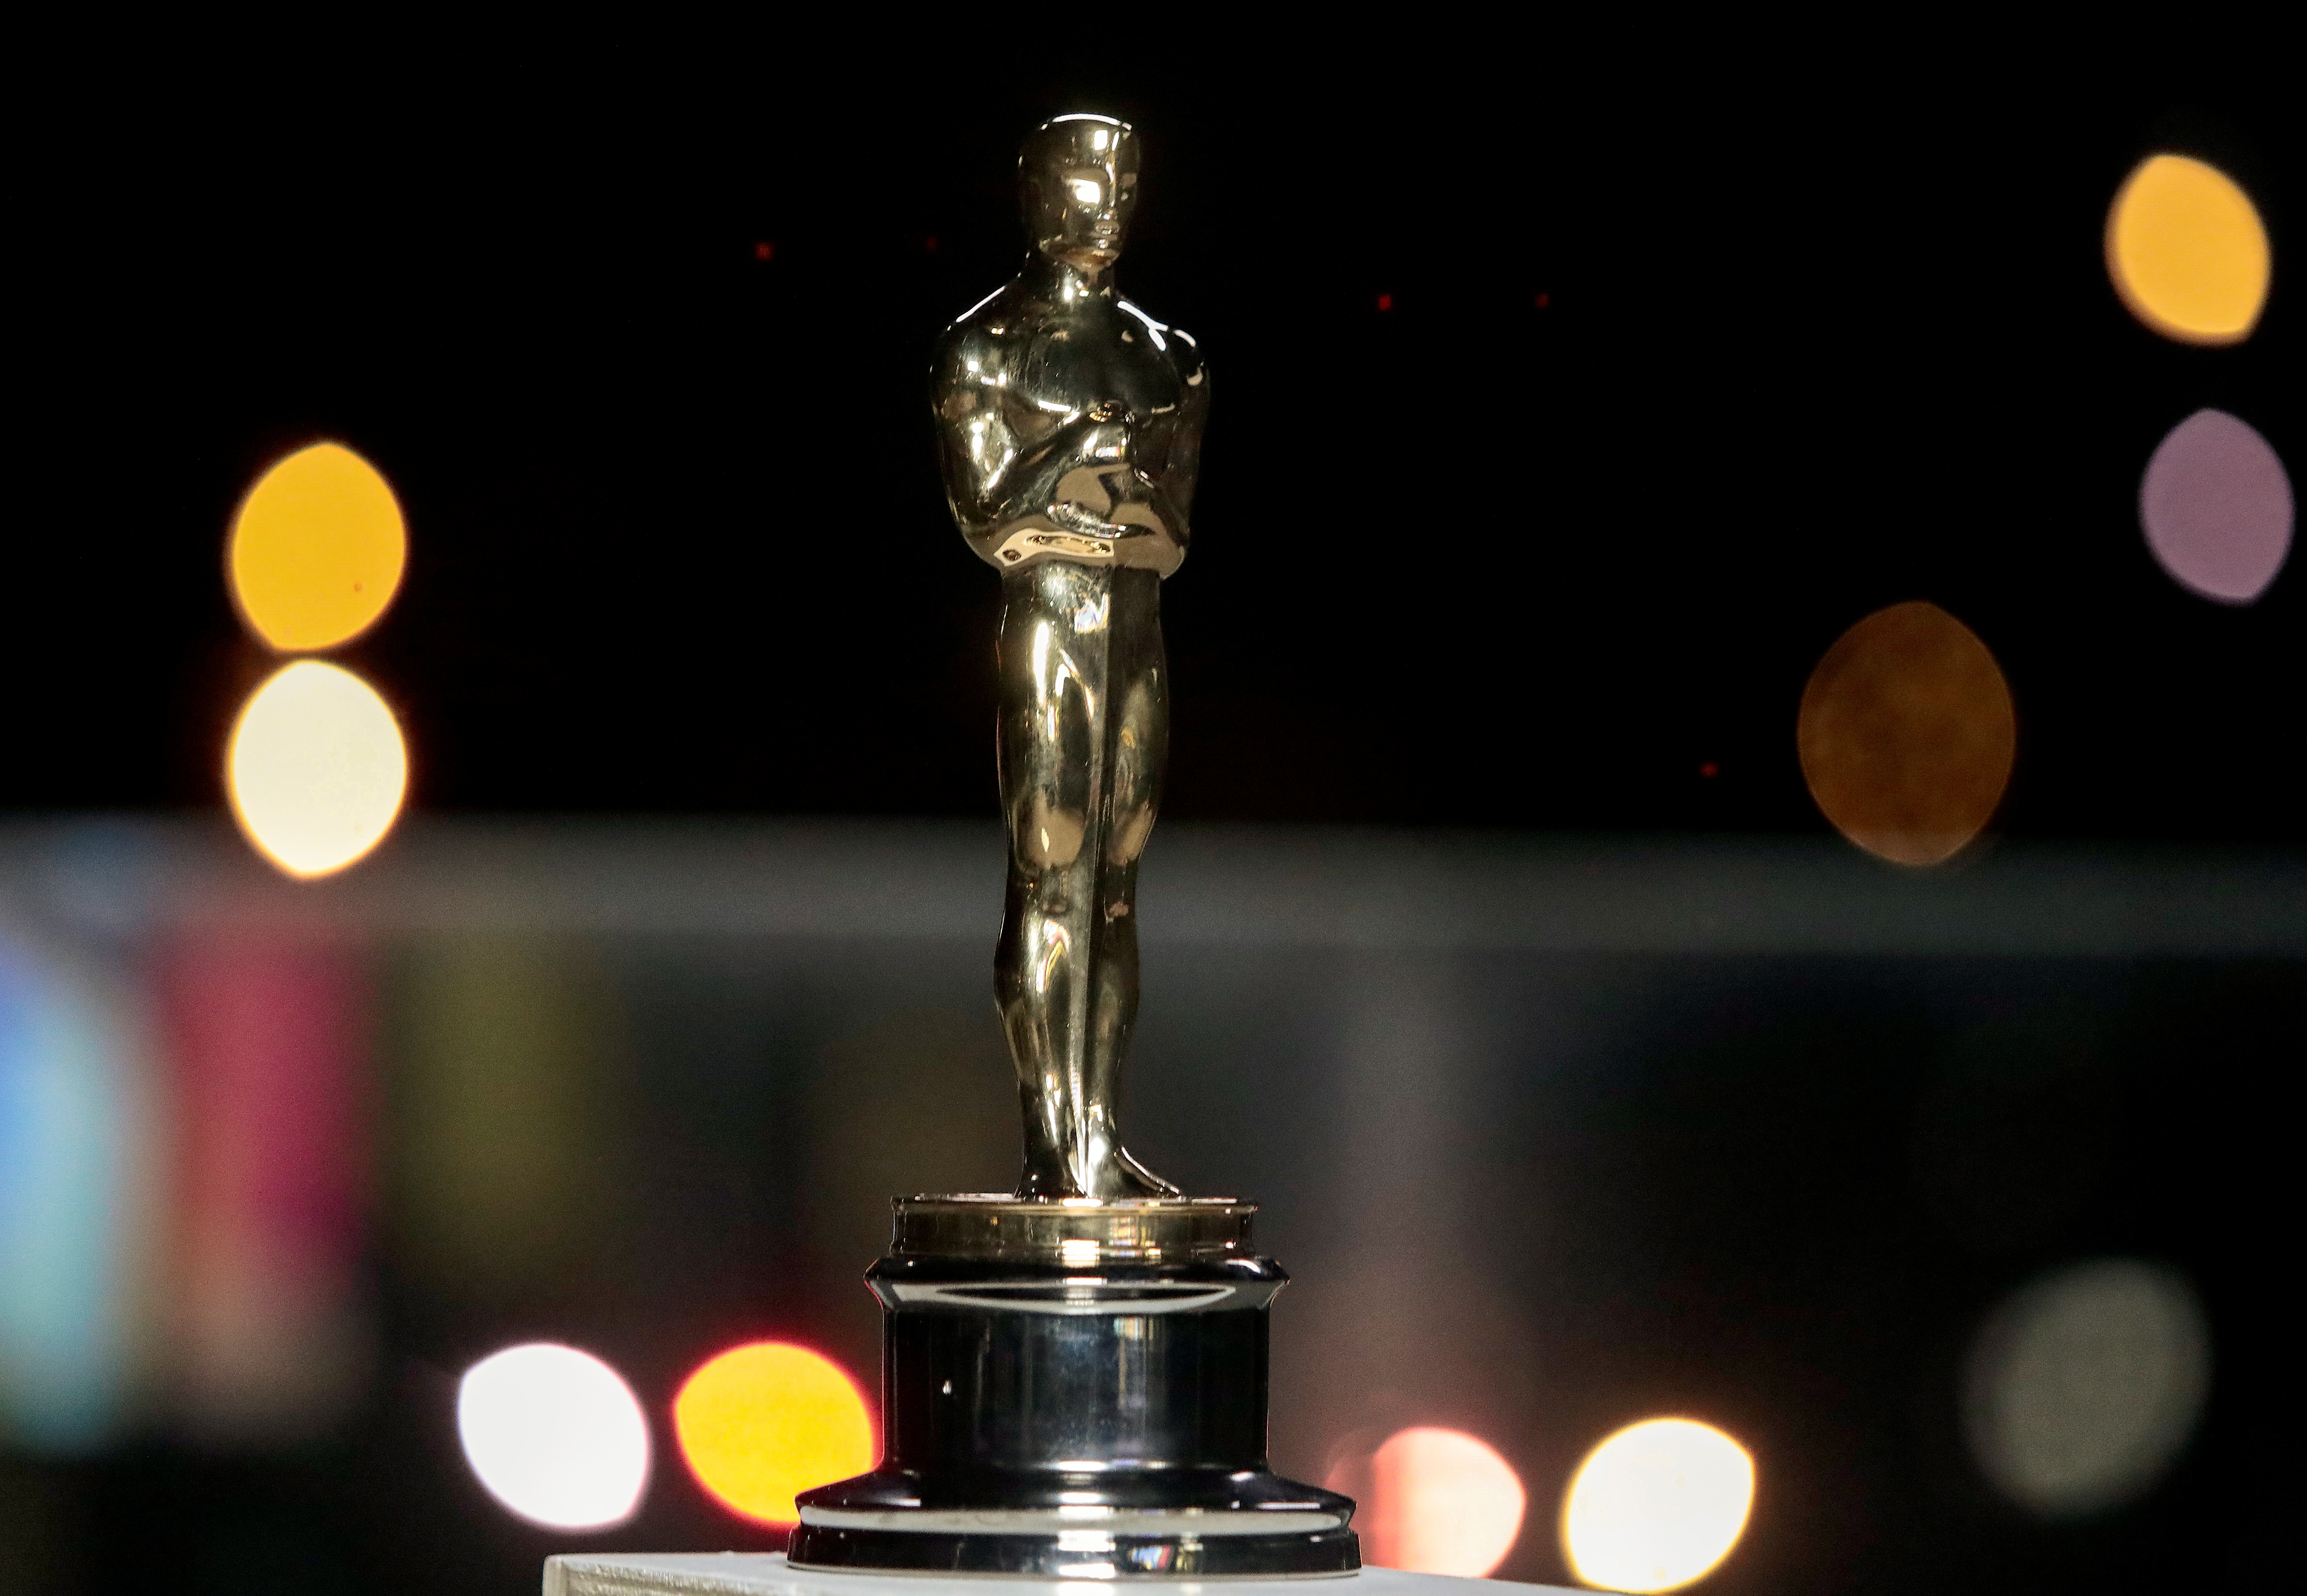 Oscars 2021: all of the winners at the 93rd Academy Awards